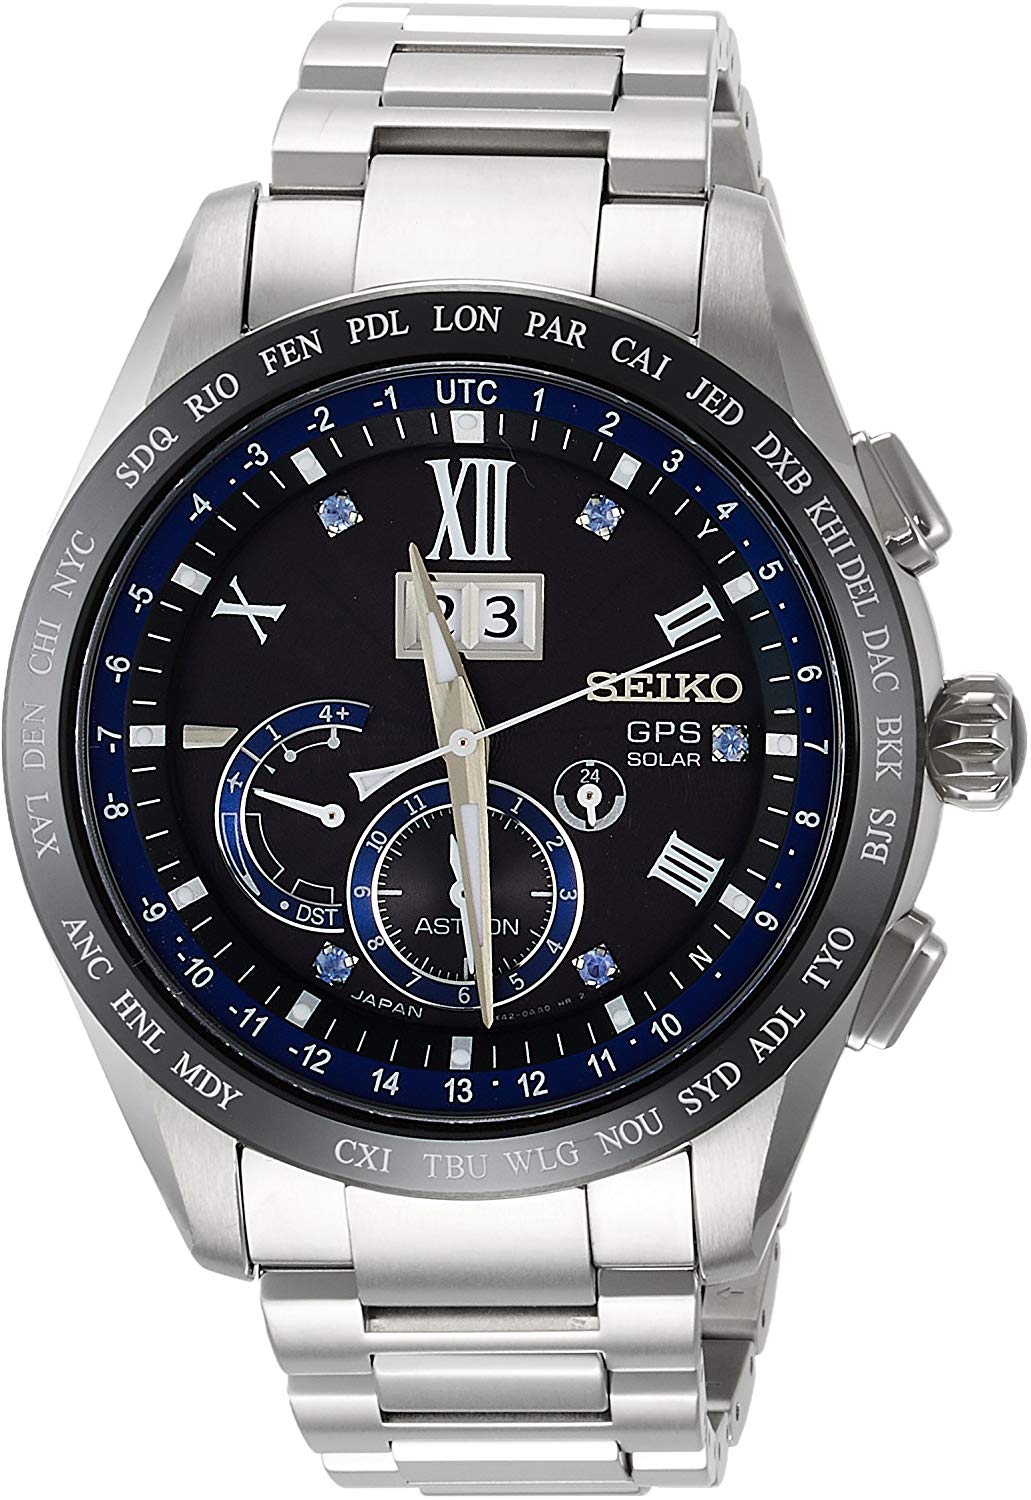 SEIKO ASTRON GPSSolar 5th Anniversary Limited BIG-DATE Titanium Model Dial  with Blue Sapphire SBXB145 Men's Silver - Discovery Japan Mall